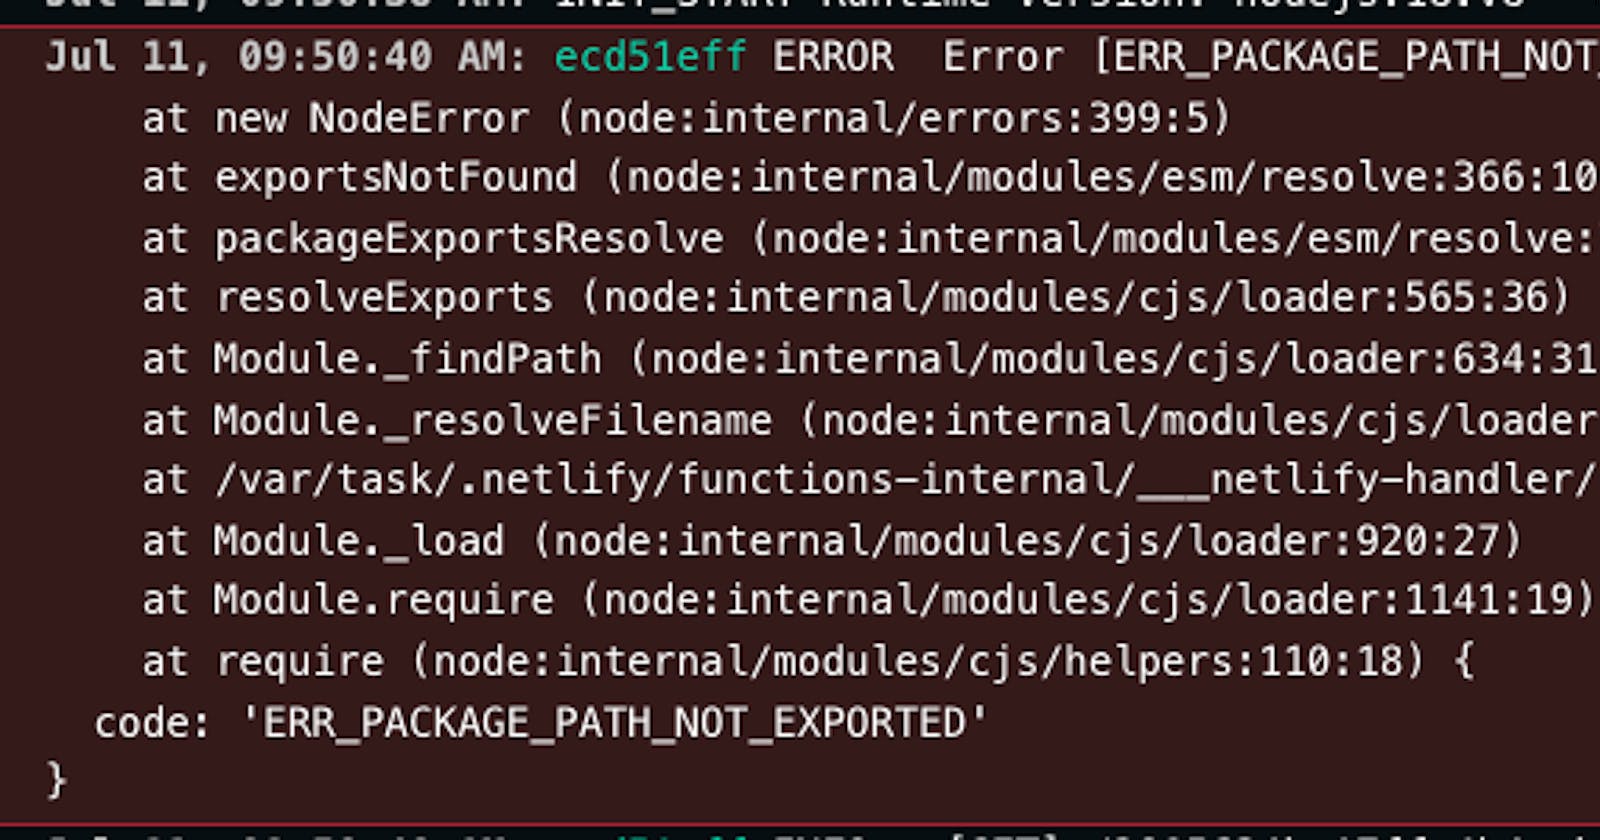 How to fix Error Package subpath './server.edge' is not defined by "exports" on Netlify